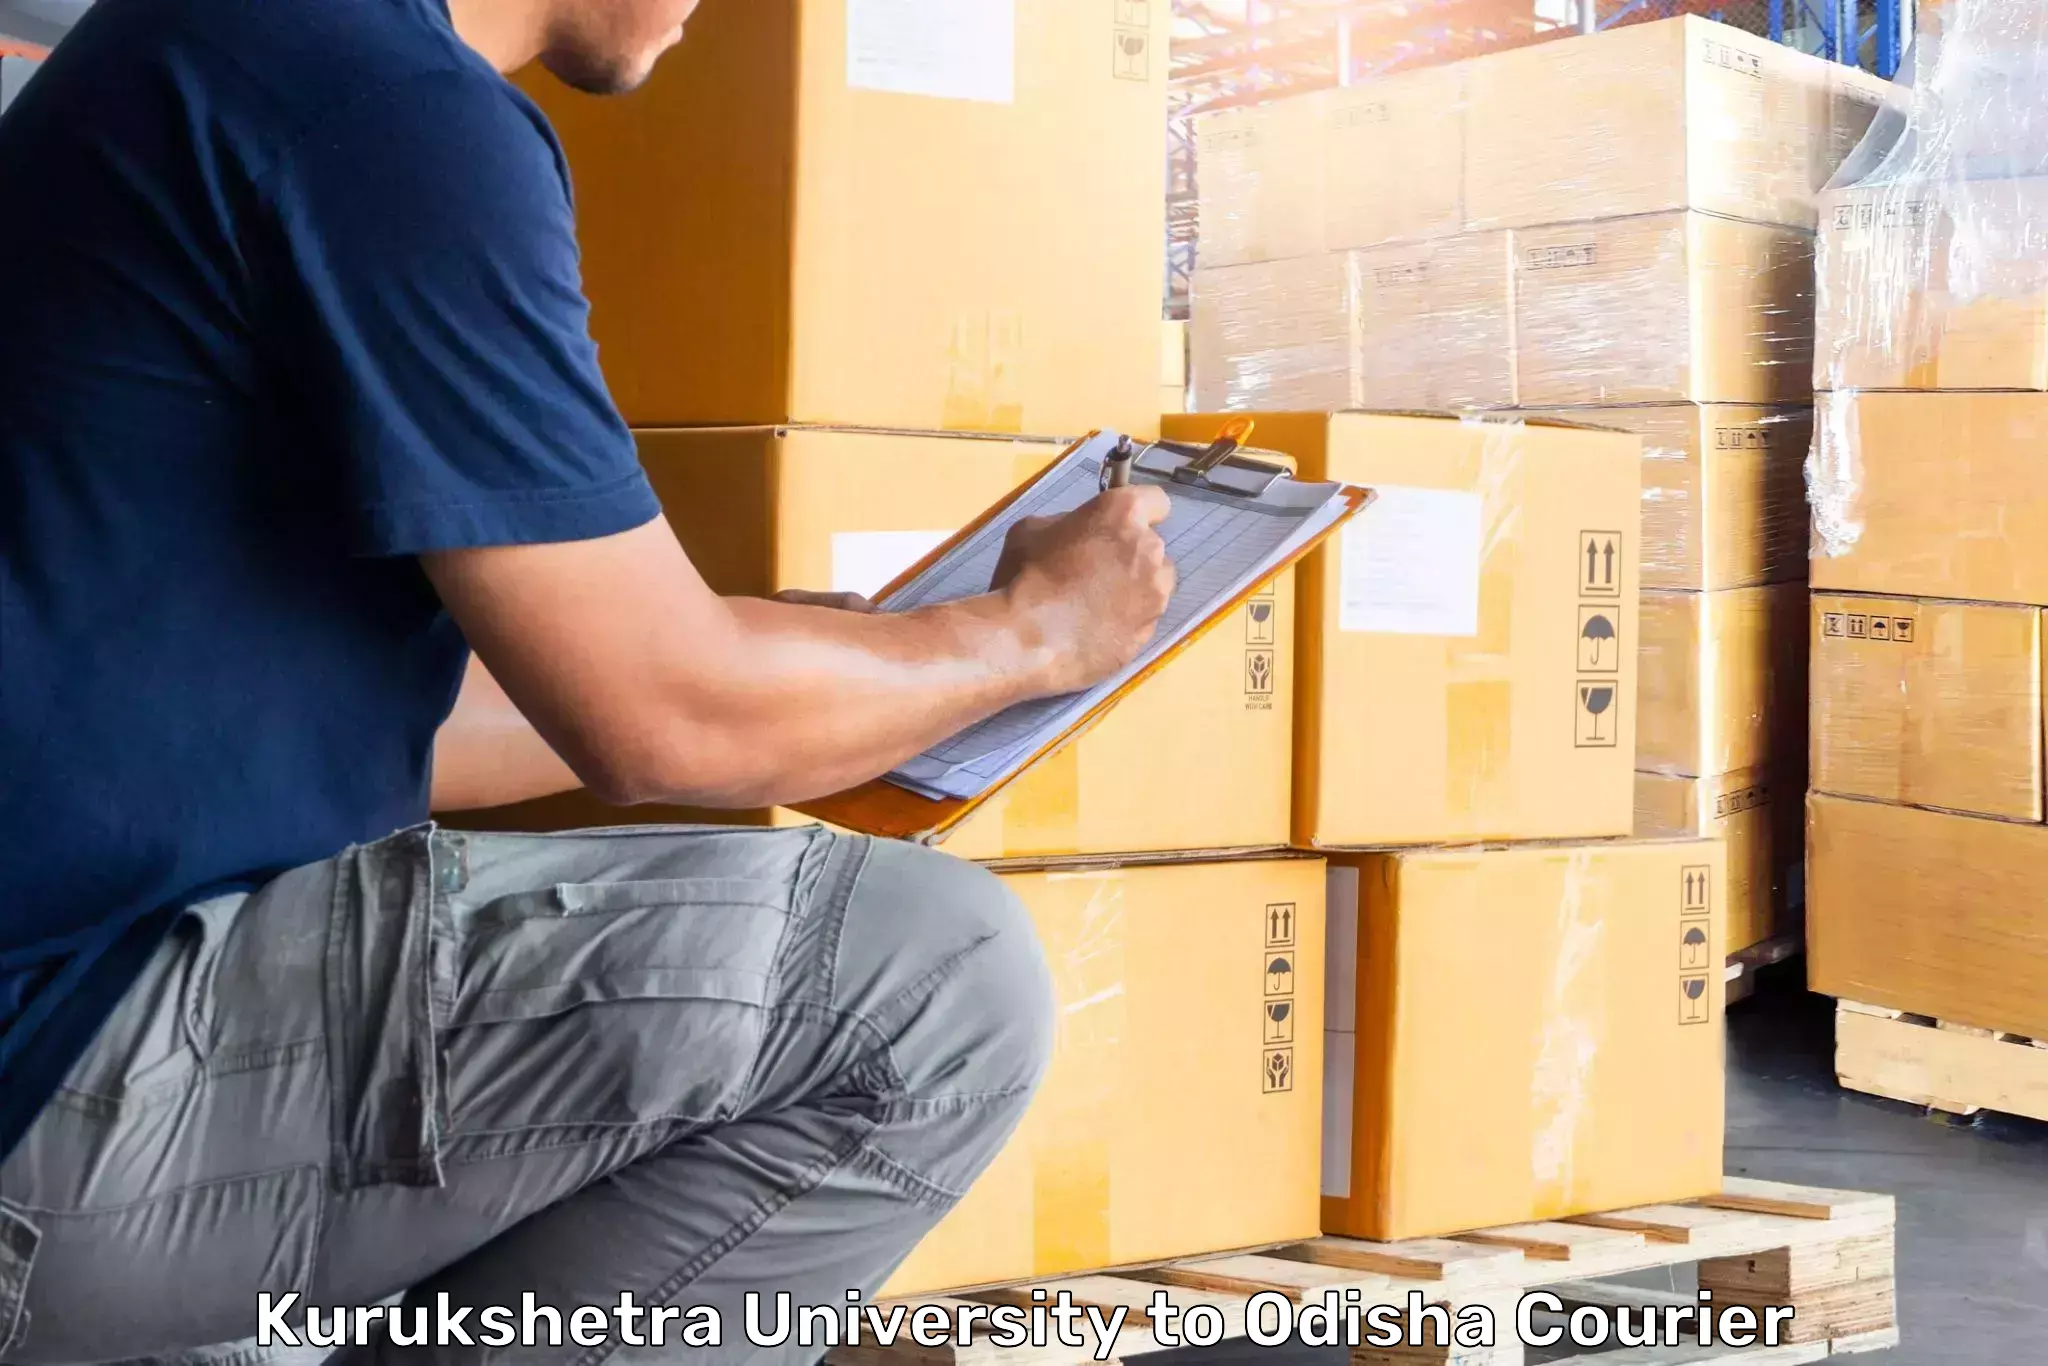 Baggage delivery scheduling in Kurukshetra University to Talcher